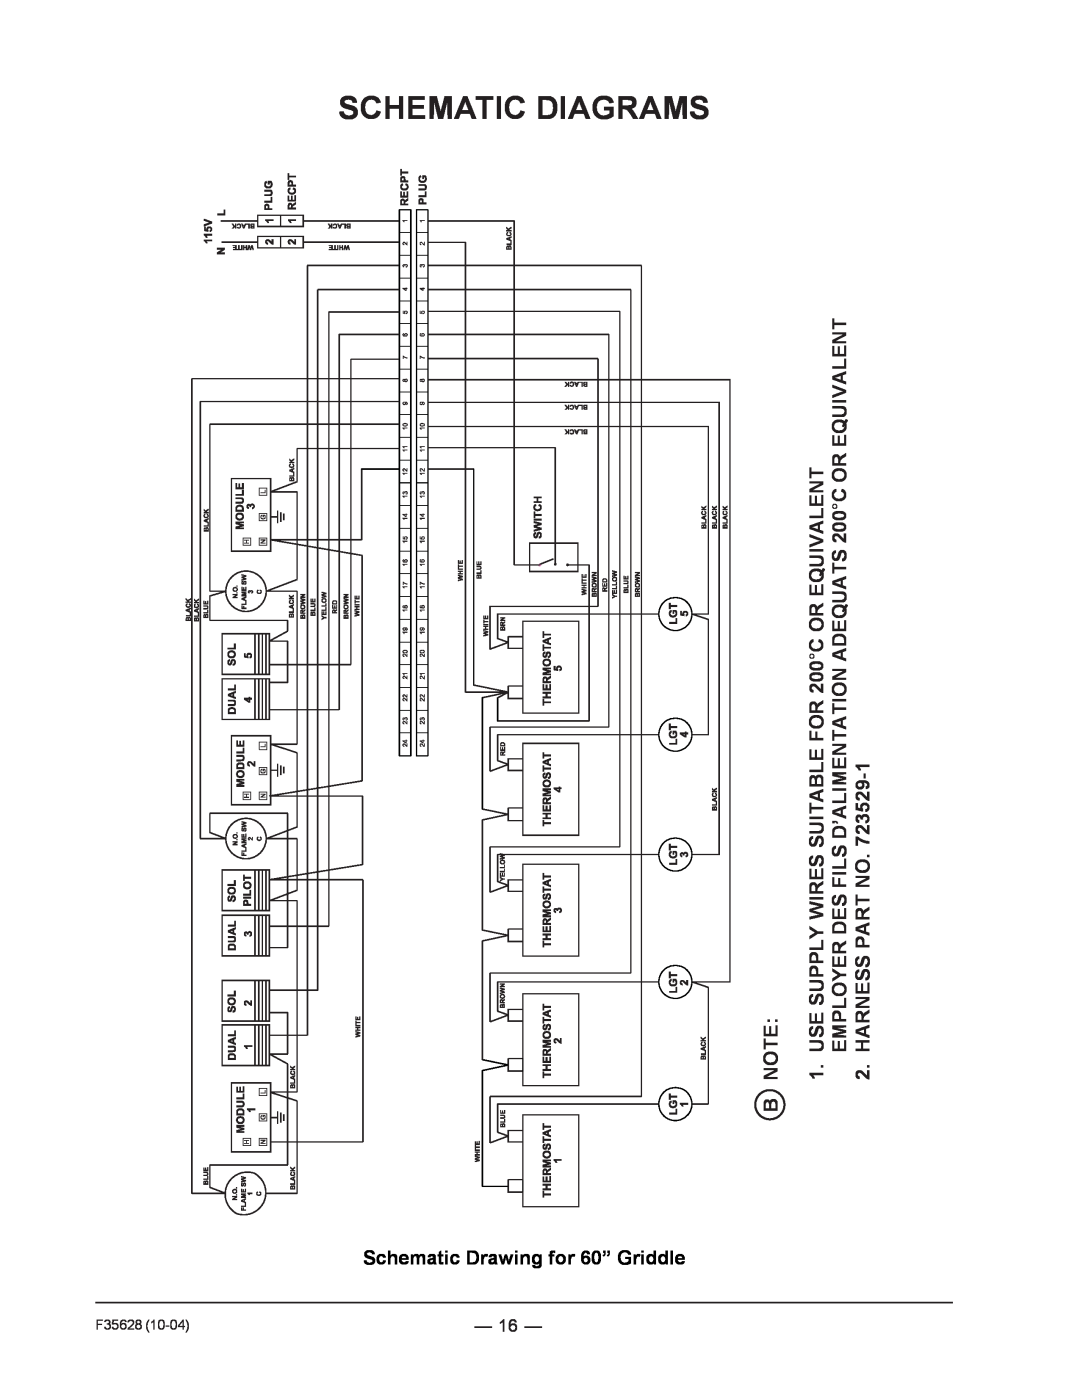 Vulcan-Hart service manual Schematic Drawing for 60” Griddle, Schematic Diagrams, 16, F35628 